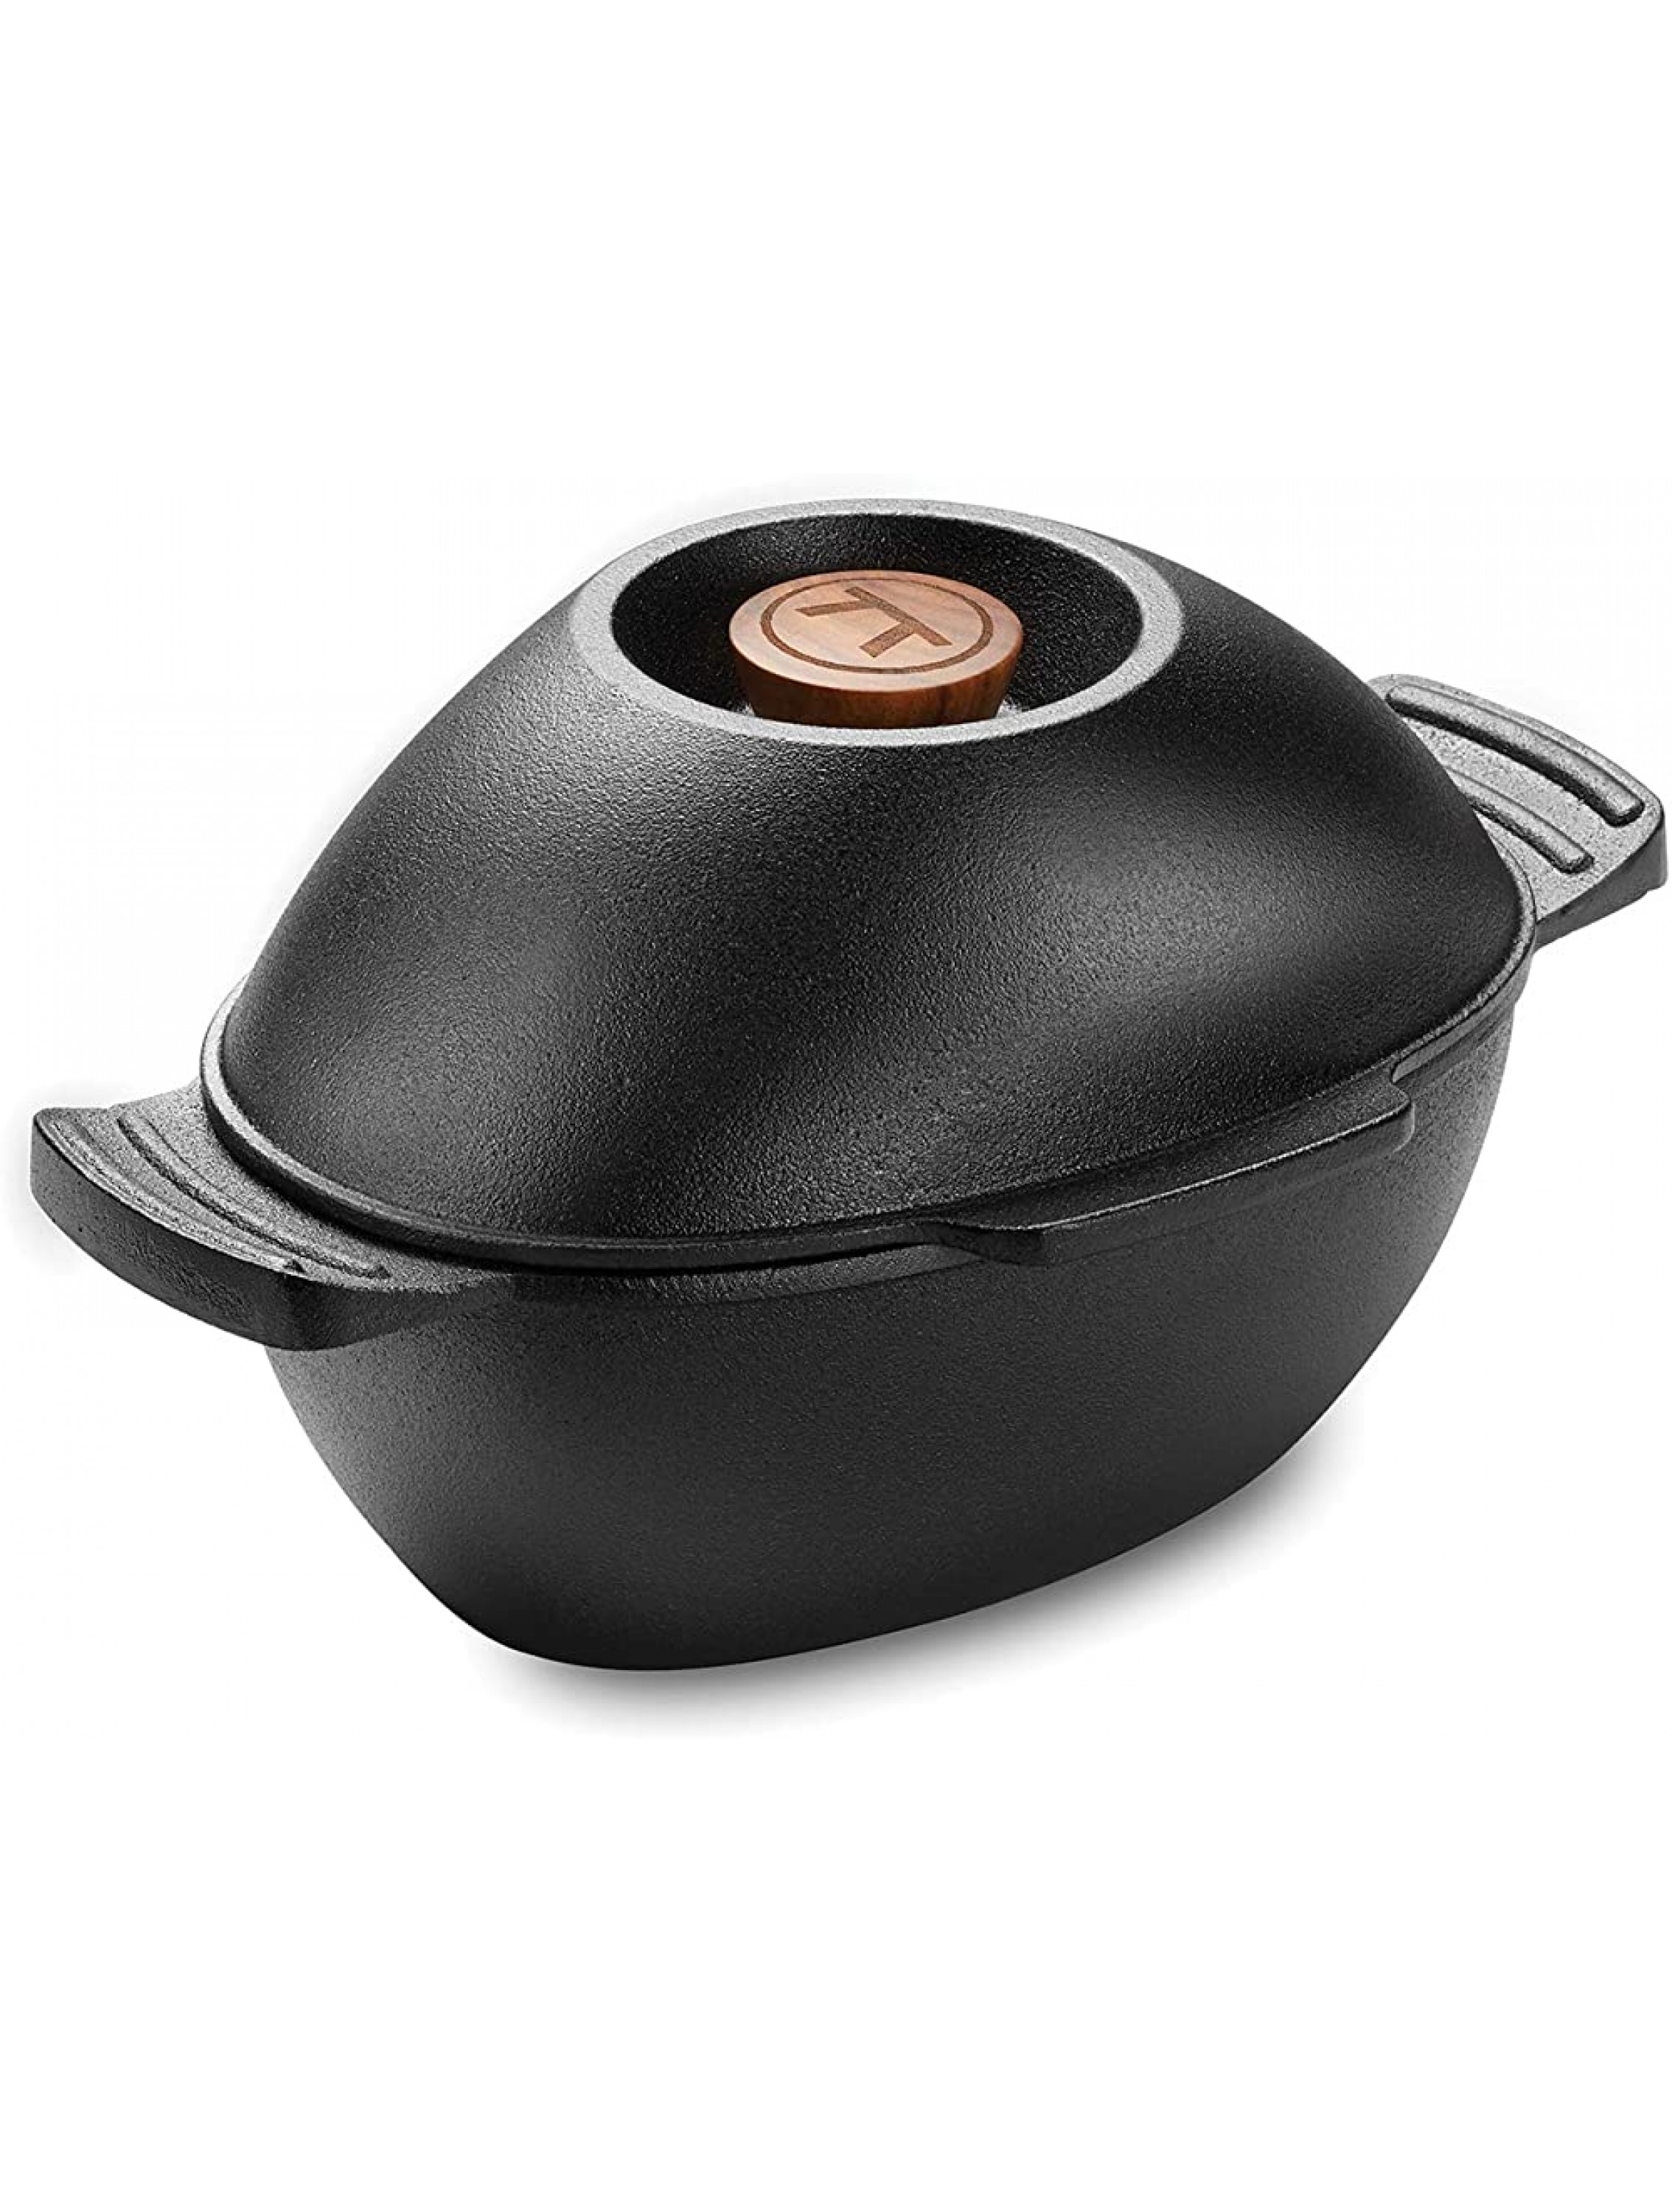 Outset 76495 Cast Iron Seafood and Mussel Pot with Lid for Empty Shells 2.5 Quart Black - BVKLW3X4W